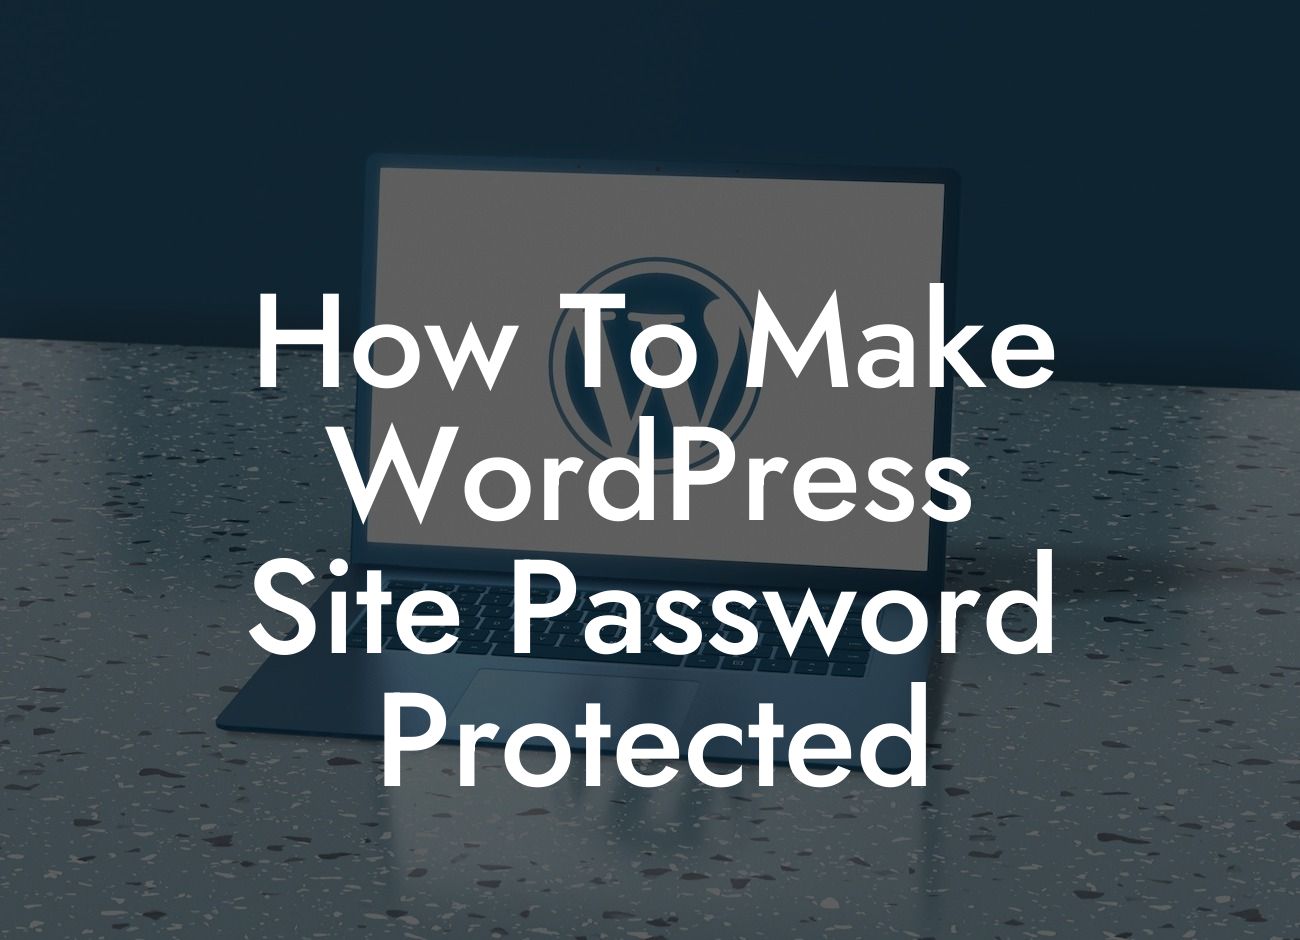 How To Make WordPress Site Password Protected